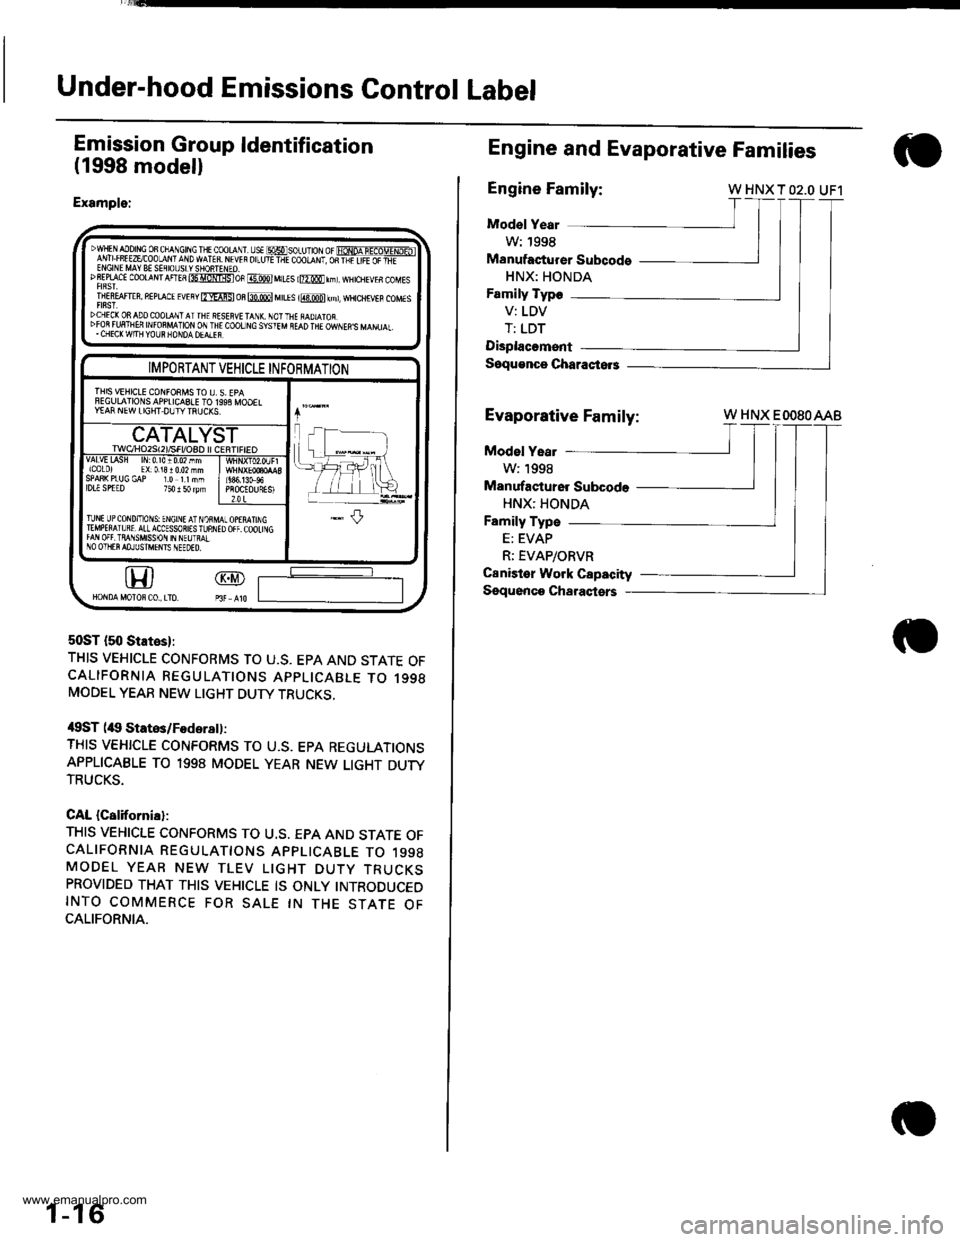 HONDA CR-V 1998 RD1-RD3 / 1.G User Guide 
Under-hood Emissions Control Label
Emission Group ldentification
(1998 modell
Example:
50ST {50 States}:
THIS VEHICLE CONFORMS TO U.S. EPA AND STATE OFCALIFORNIA REGULATIONS APPLICABLE TO 1998MODEL Y